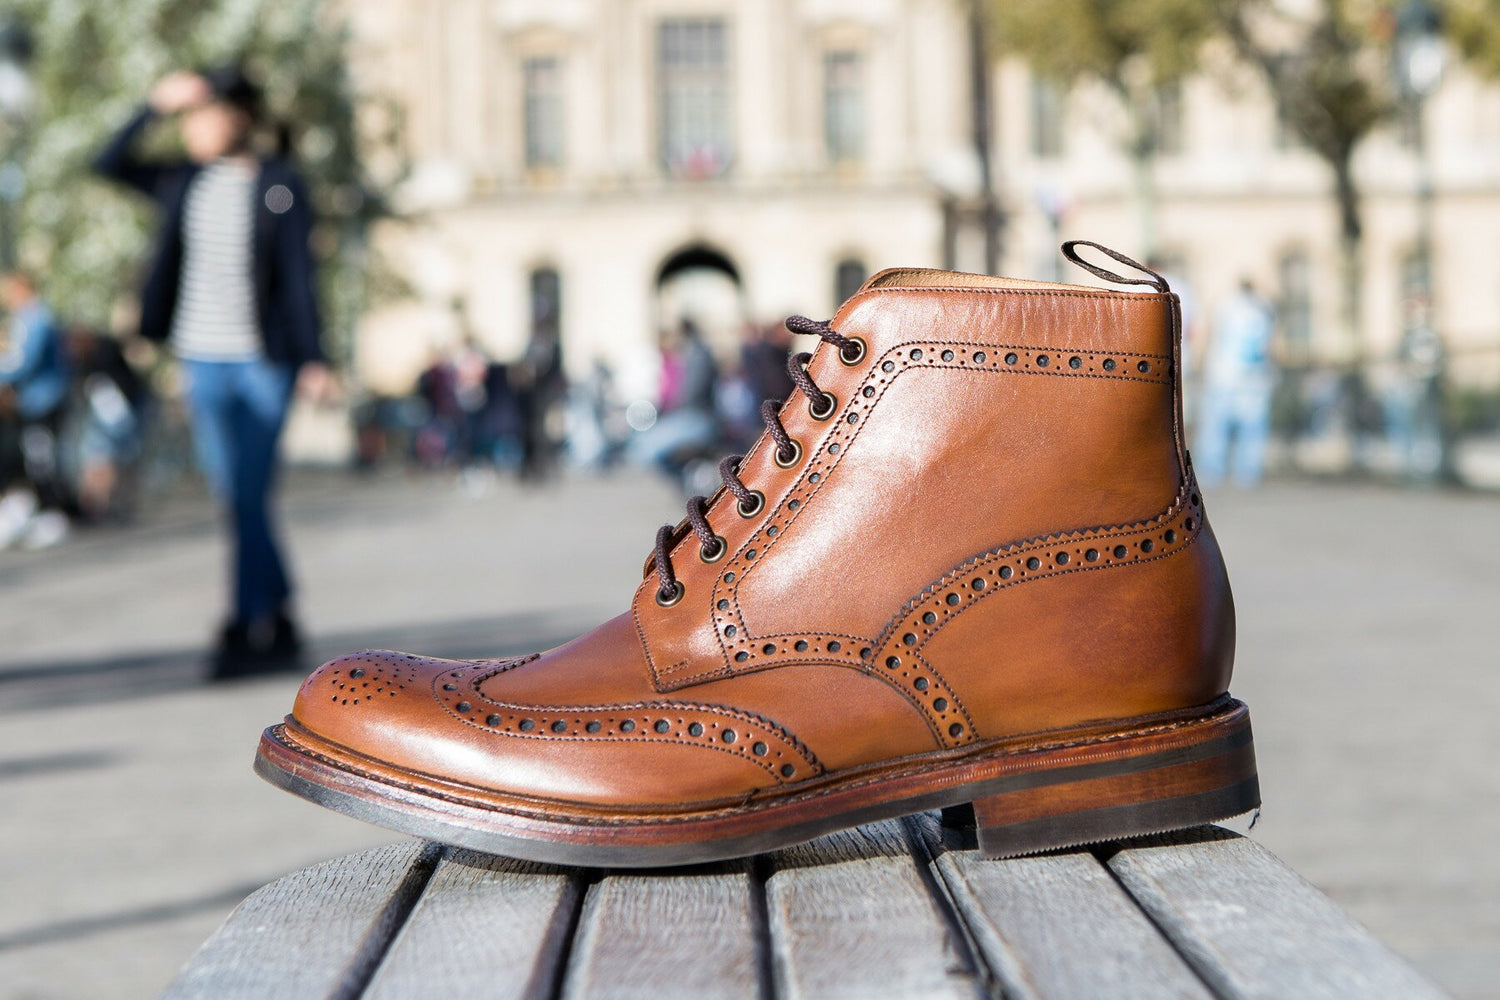 Loake - Boots cuir marron semelle cousue gomme cousue goodyear